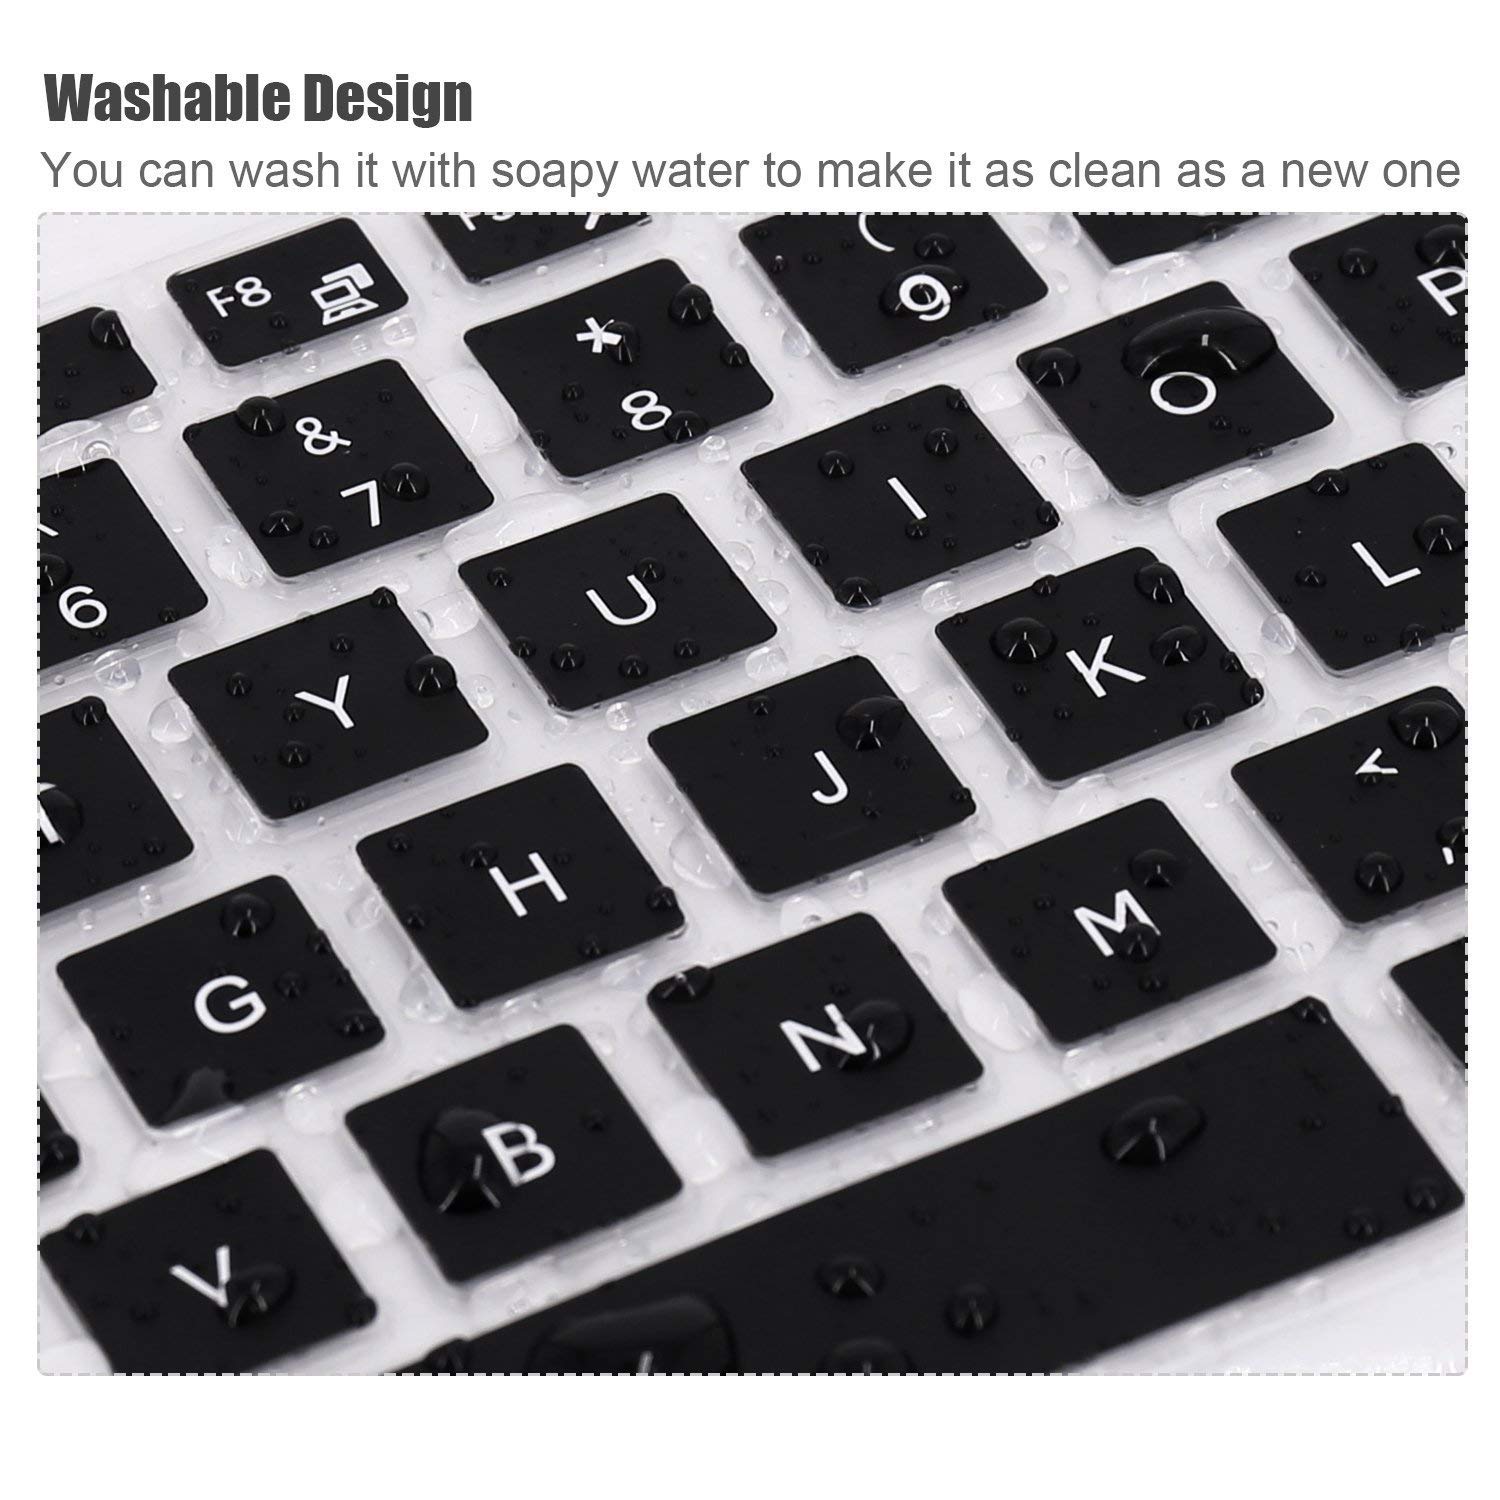 Silicone Keyboard Skin Cover for Dell Inspiron 15.6 inch 5000 7000 Series 15.6